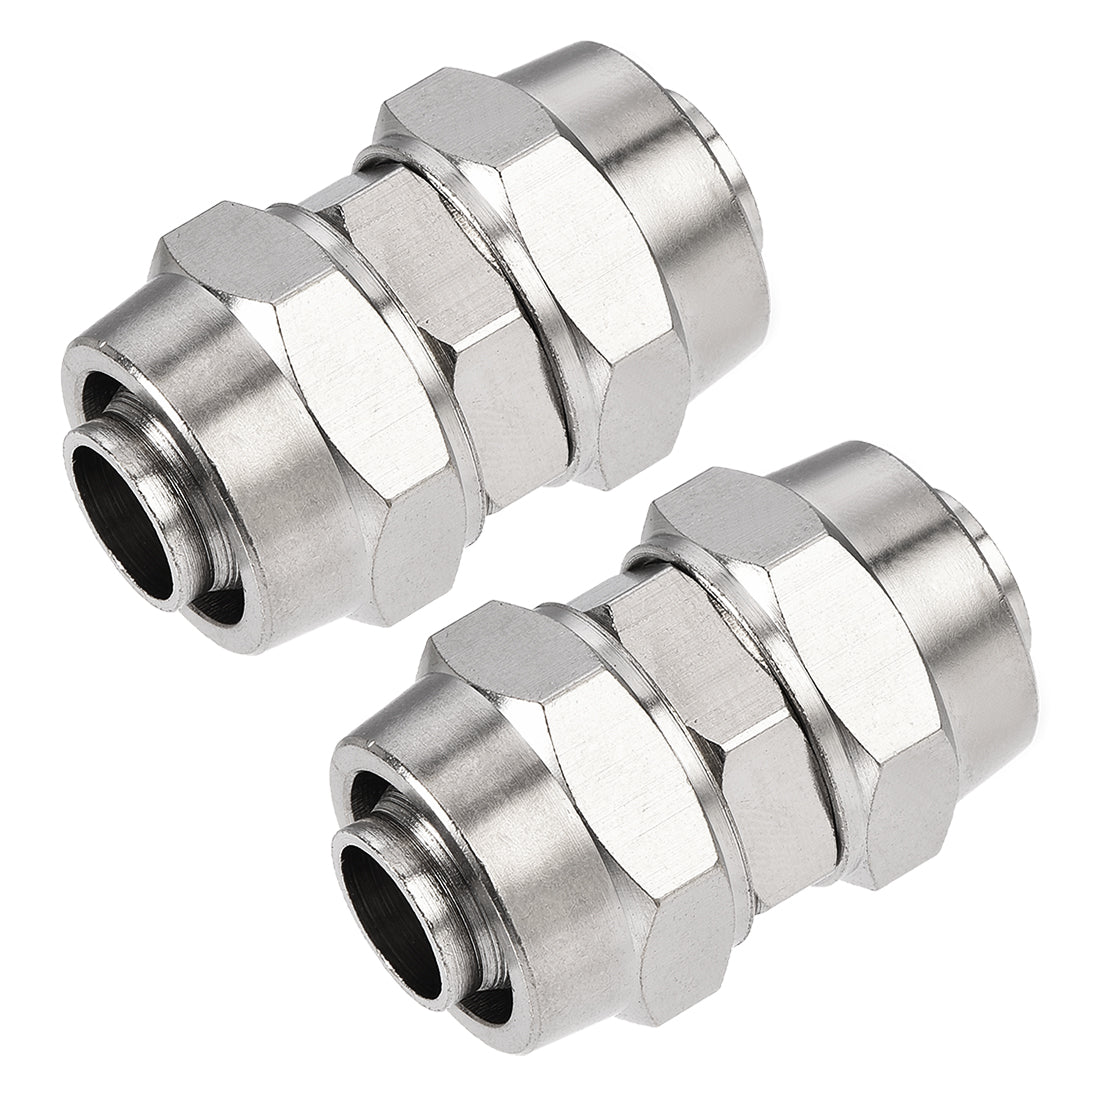 uxcell Uxcell Compression Tube Fitting Nickel Plating for 12mm Pneumatic Hose Tube 2pcs